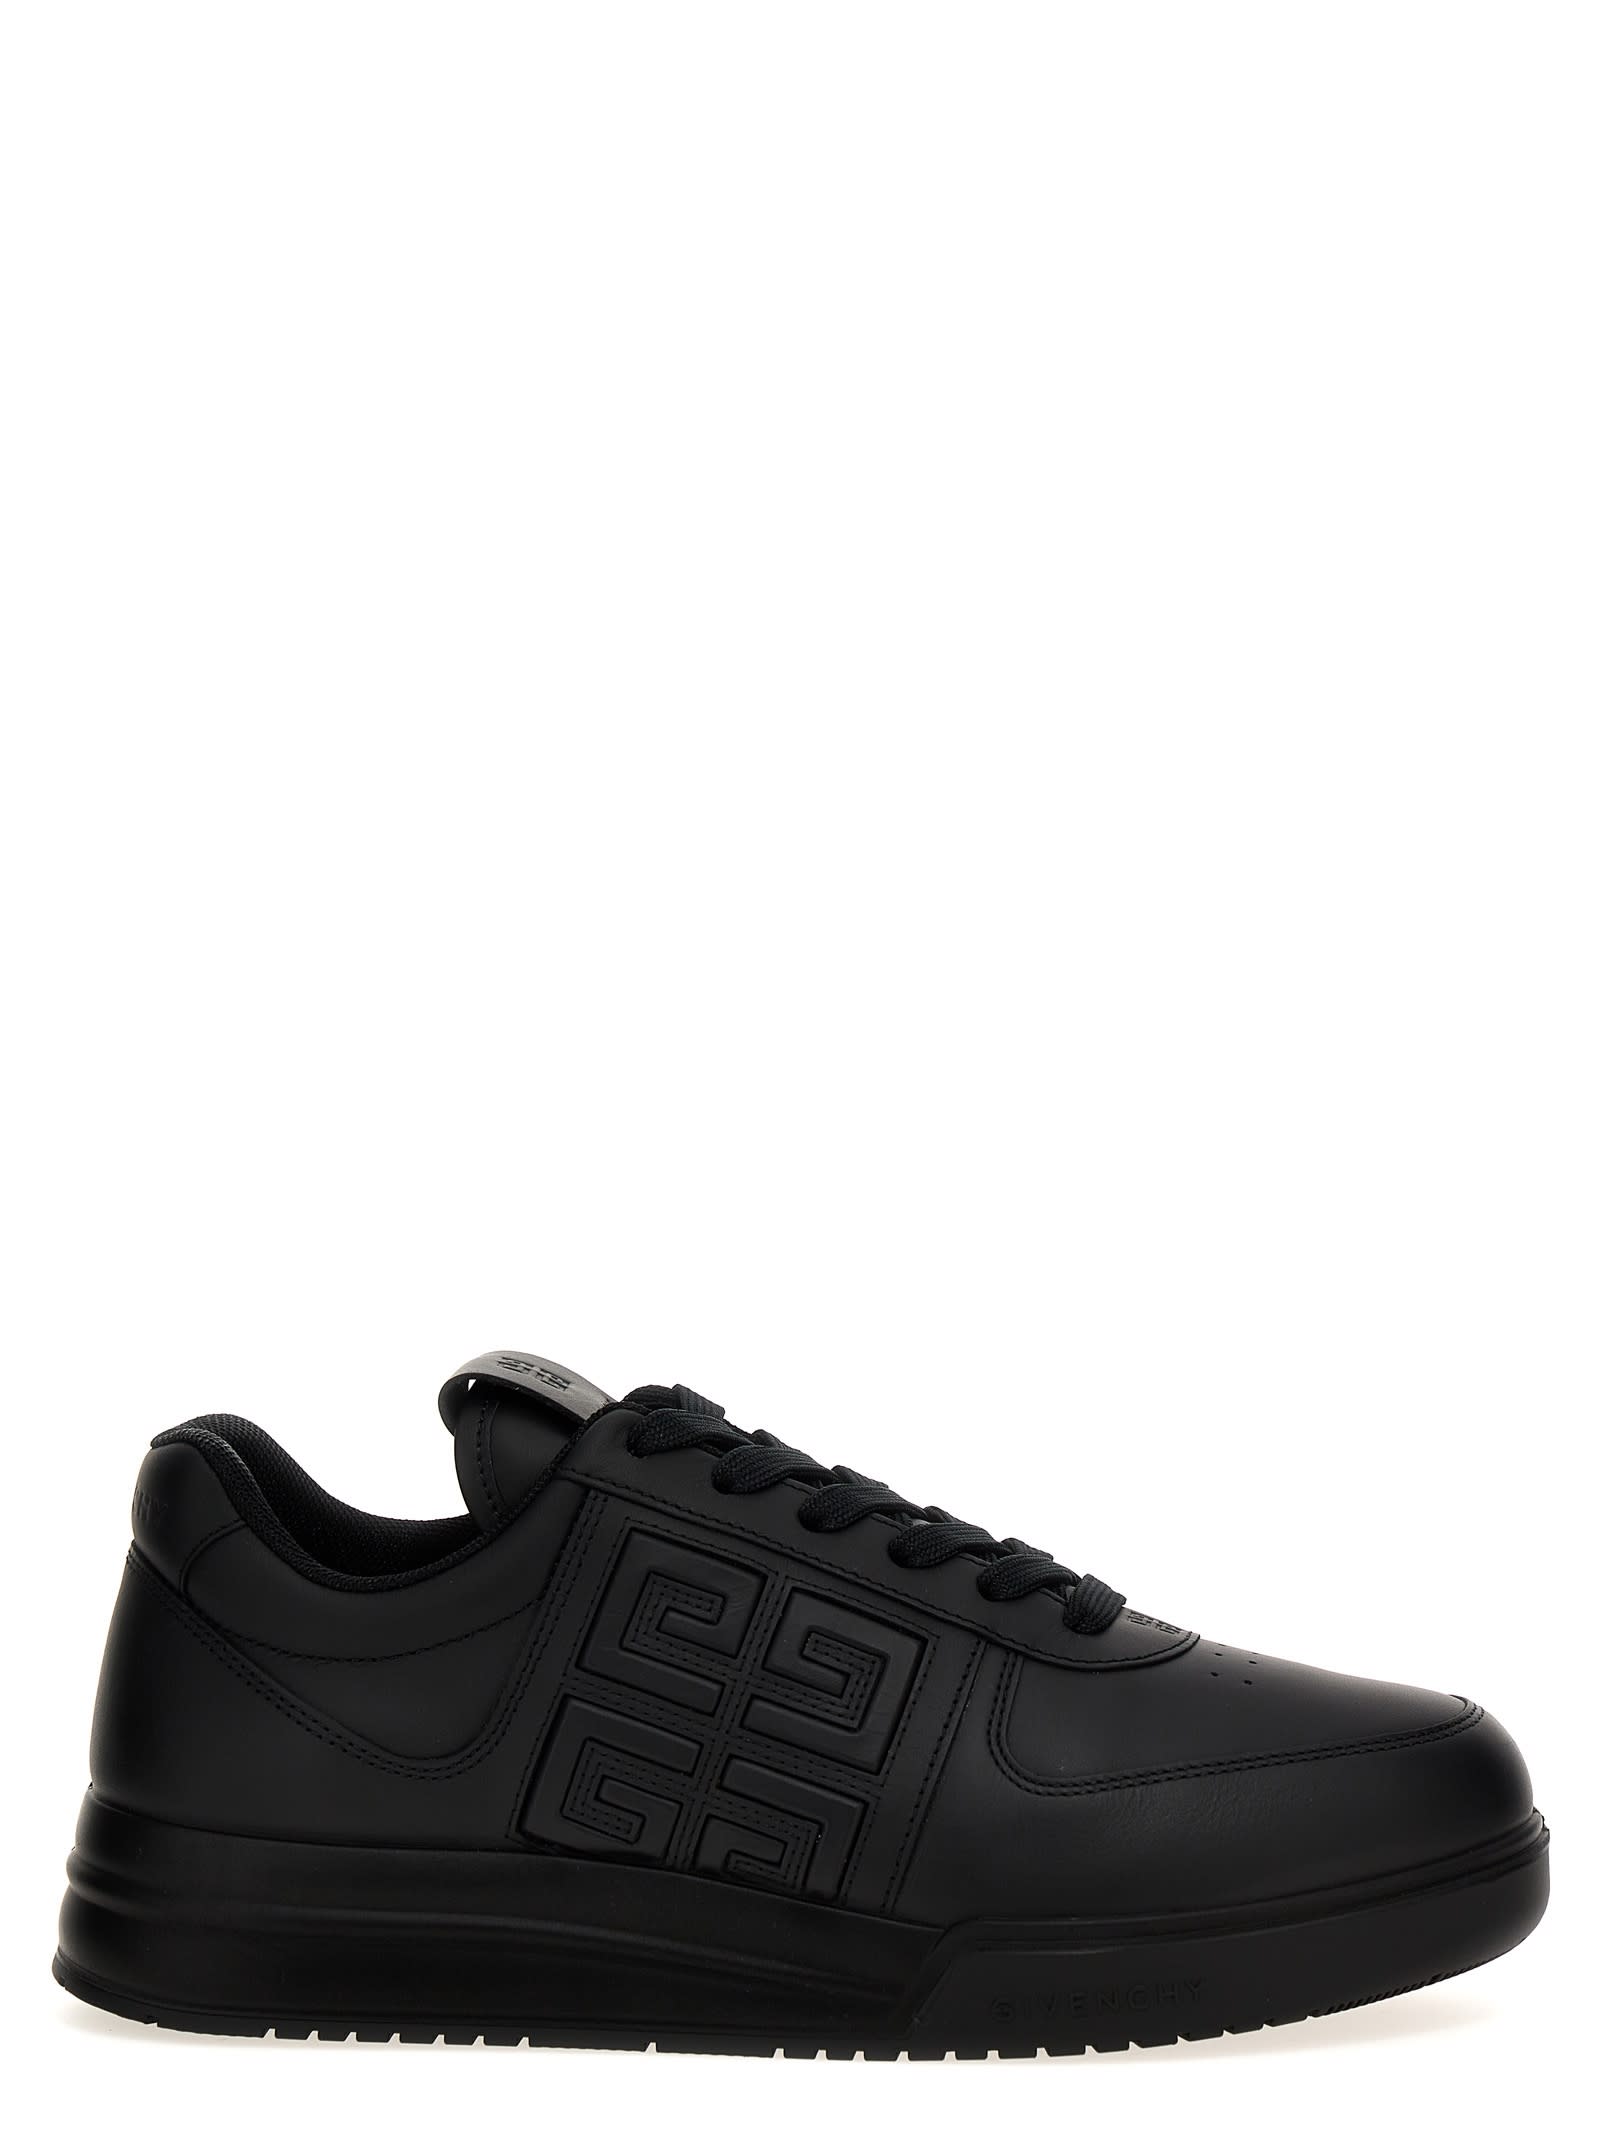 Givenchy 4g Sneakers In Black